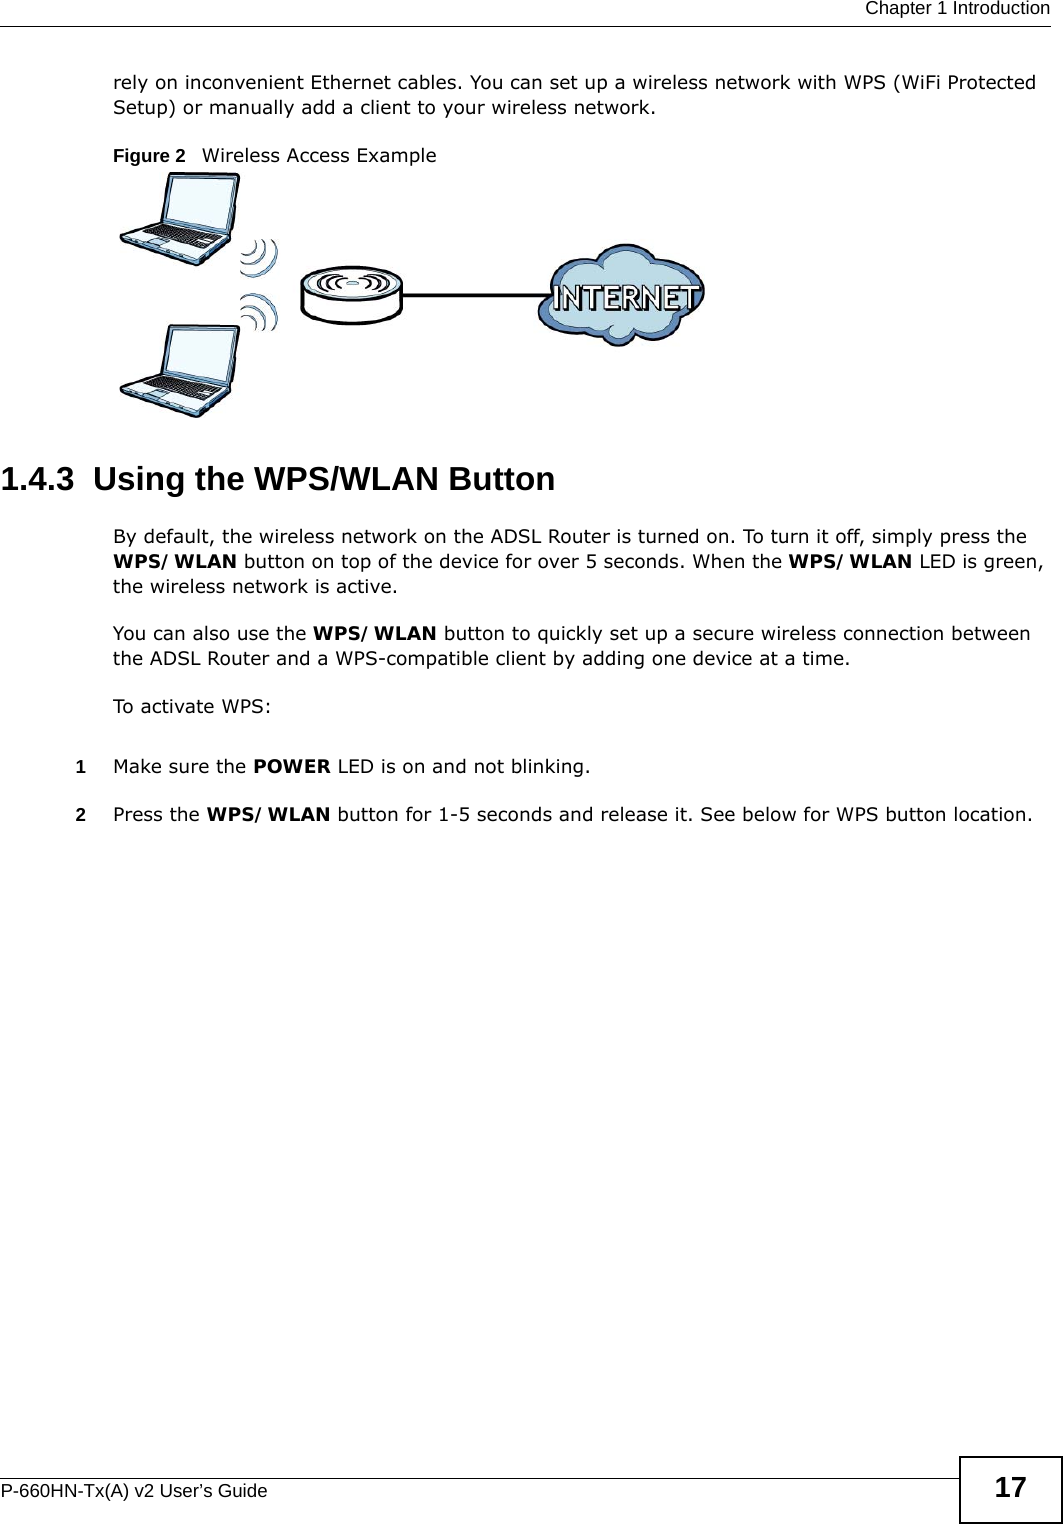  Chapter 1 IntroductionP-660HN-Tx(A) v2 User’s Guide 17rely on inconvenient Ethernet cables. You can set up a wireless network with WPS (WiFi Protected Setup) or manually add a client to your wireless network.Figure 2   Wireless Access Example1.4.3  Using the WPS/WLAN ButtonBy default, the wireless network on the ADSL Router is turned on. To turn it off, simply press the WPS/WLAN button on top of the device for over 5 seconds. When the WPS/WLAN LED is green, the wireless network is active.You can also use the WPS/WLAN button to quickly set up a secure wireless connection between the ADSL Router and a WPS-compatible client by adding one device at a time.To activate WPS:1Make sure the POWER LED is on and not blinking.2Press the WPS/WLAN button for 1-5 seconds and release it. See below for WPS button location.